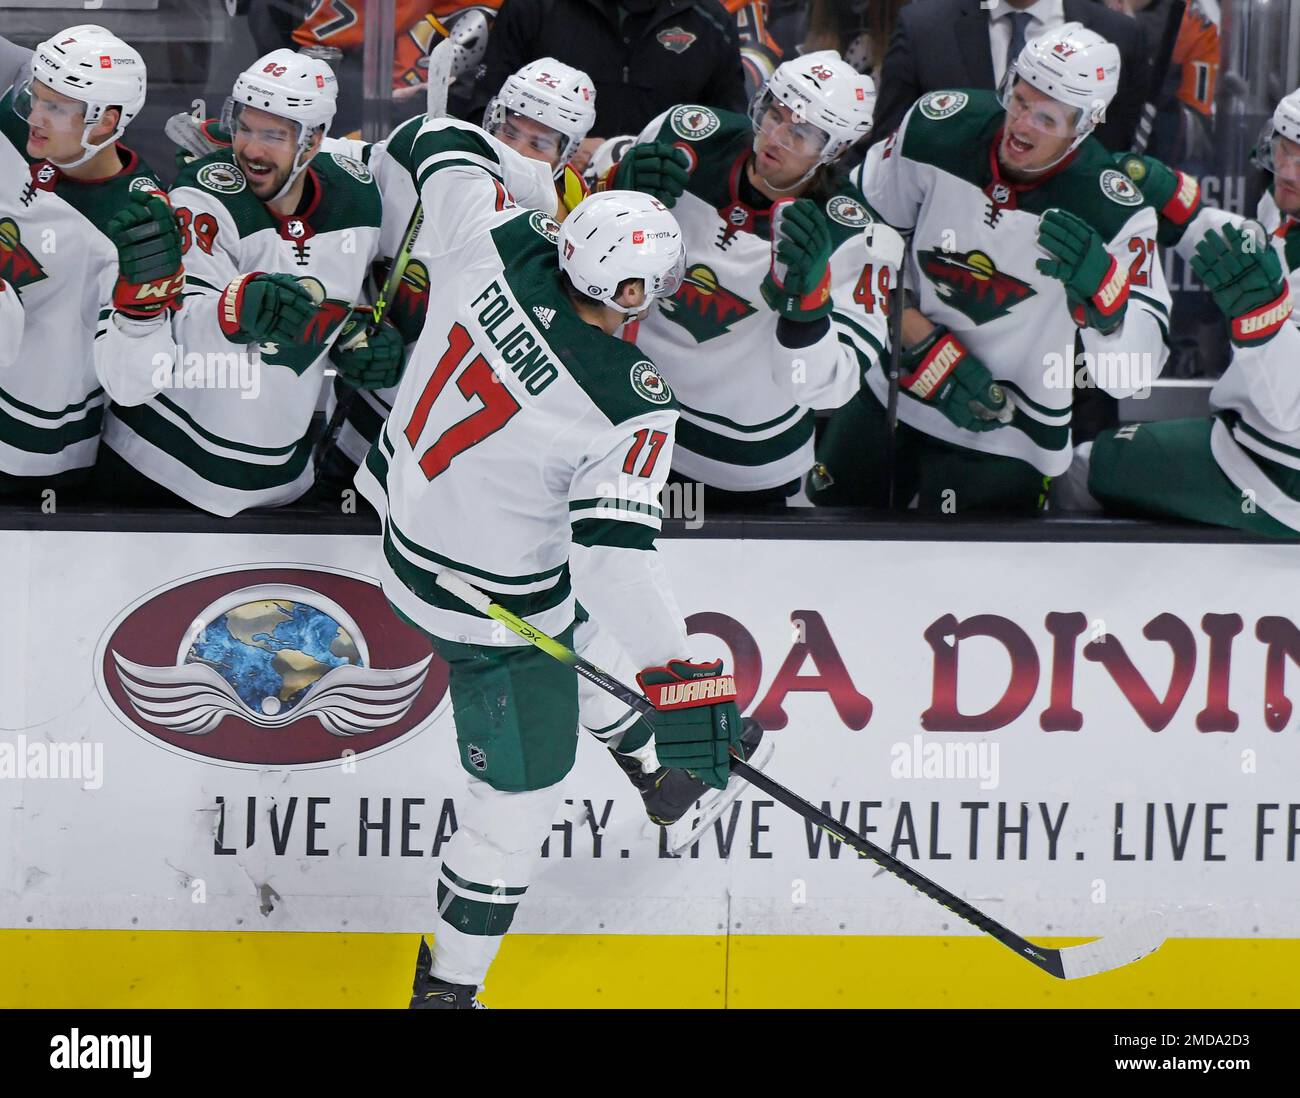 Minnesota Wild left wing Marcus Foligno (17) celebrates after scoring against the Anaheim Ducks in the final minute of an NHL hockey game Friday, Oct